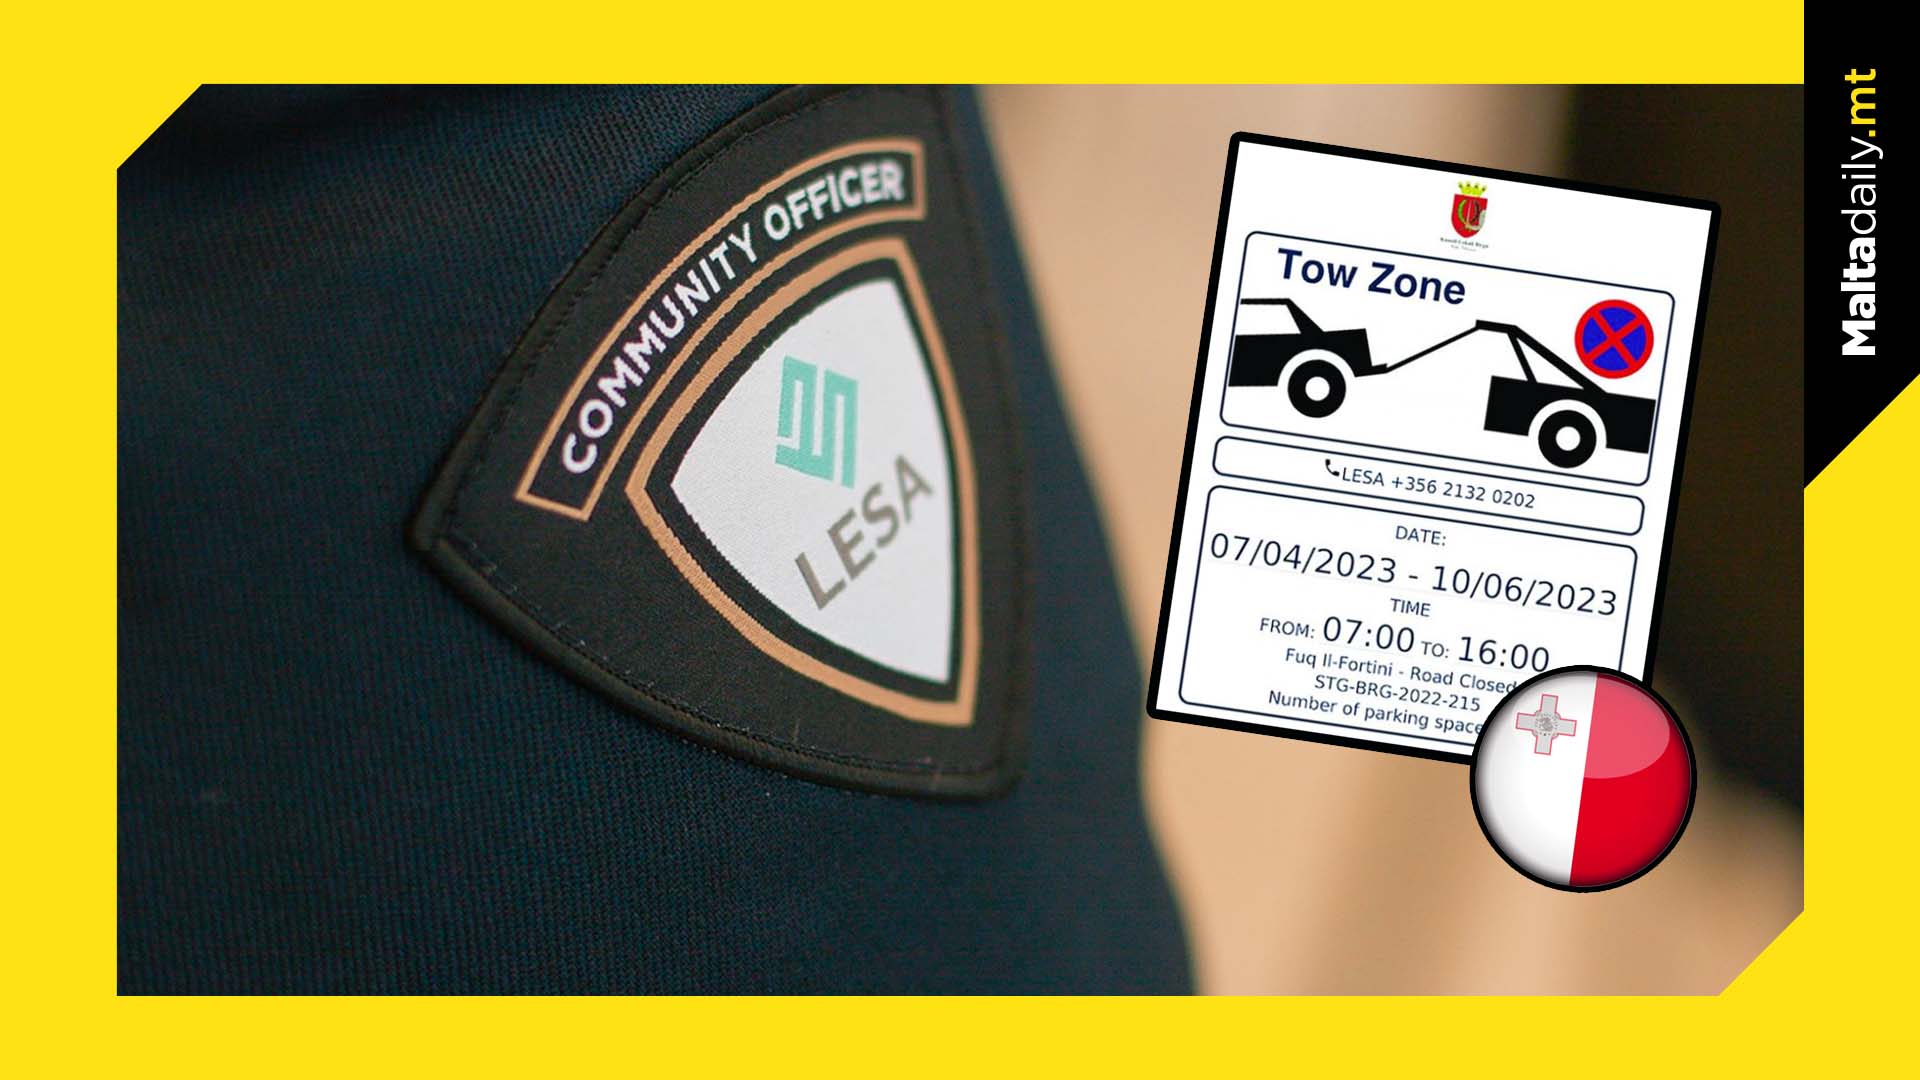 LESA can now officially enforce parking permits